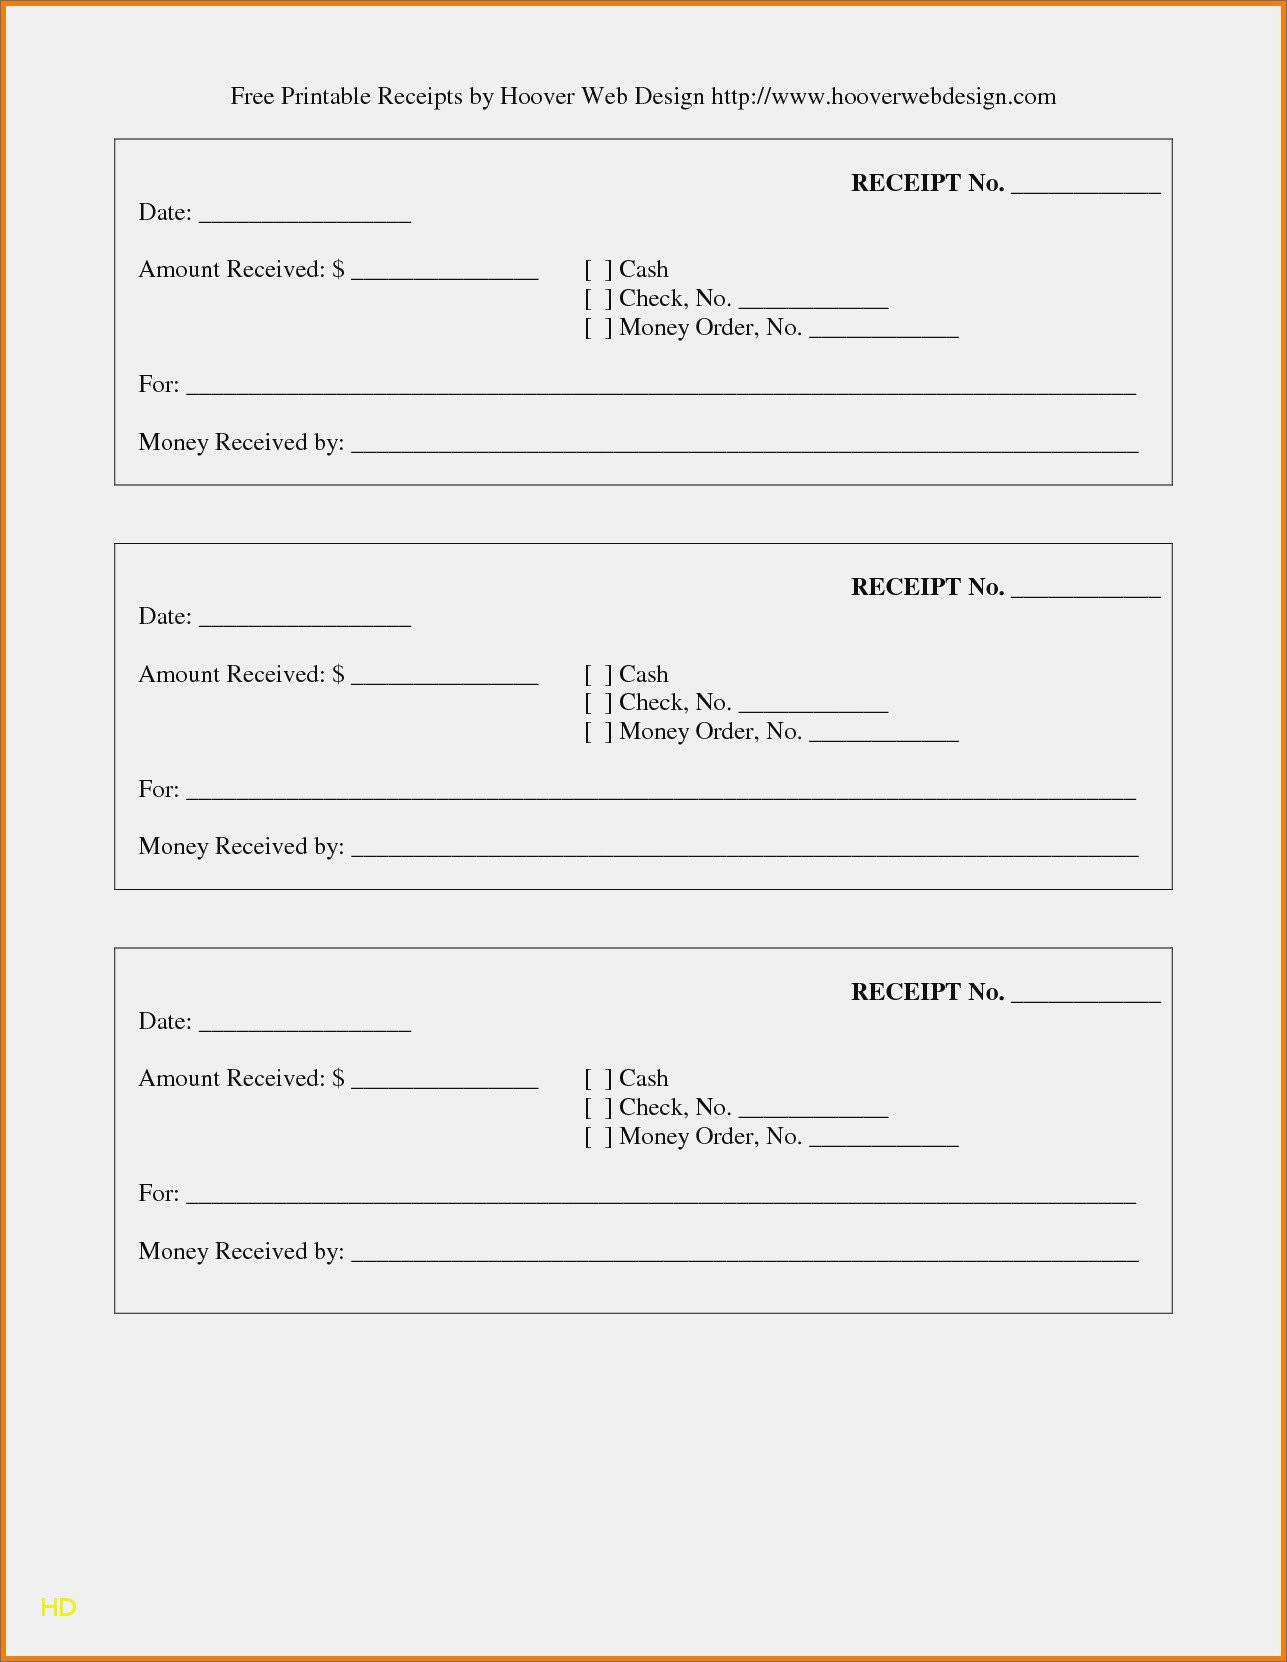 Child Care Invoice Template For Nanny Services 10 Childcare Cio - Free Printable Daycare Receipts